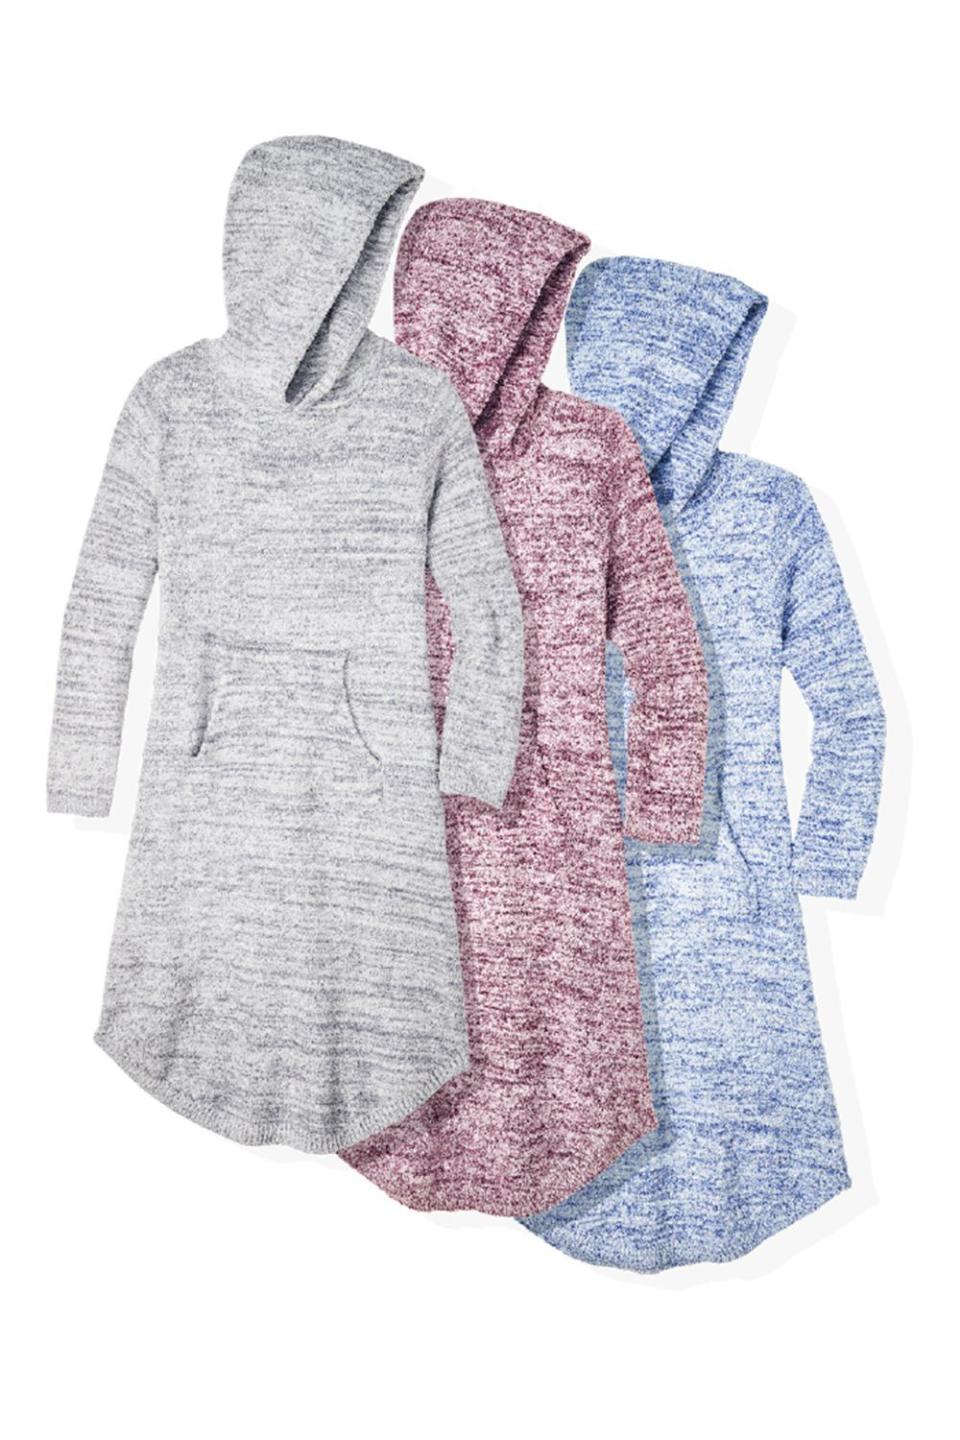 11) Ultra-Soft Marshmallow Hooded Lounger